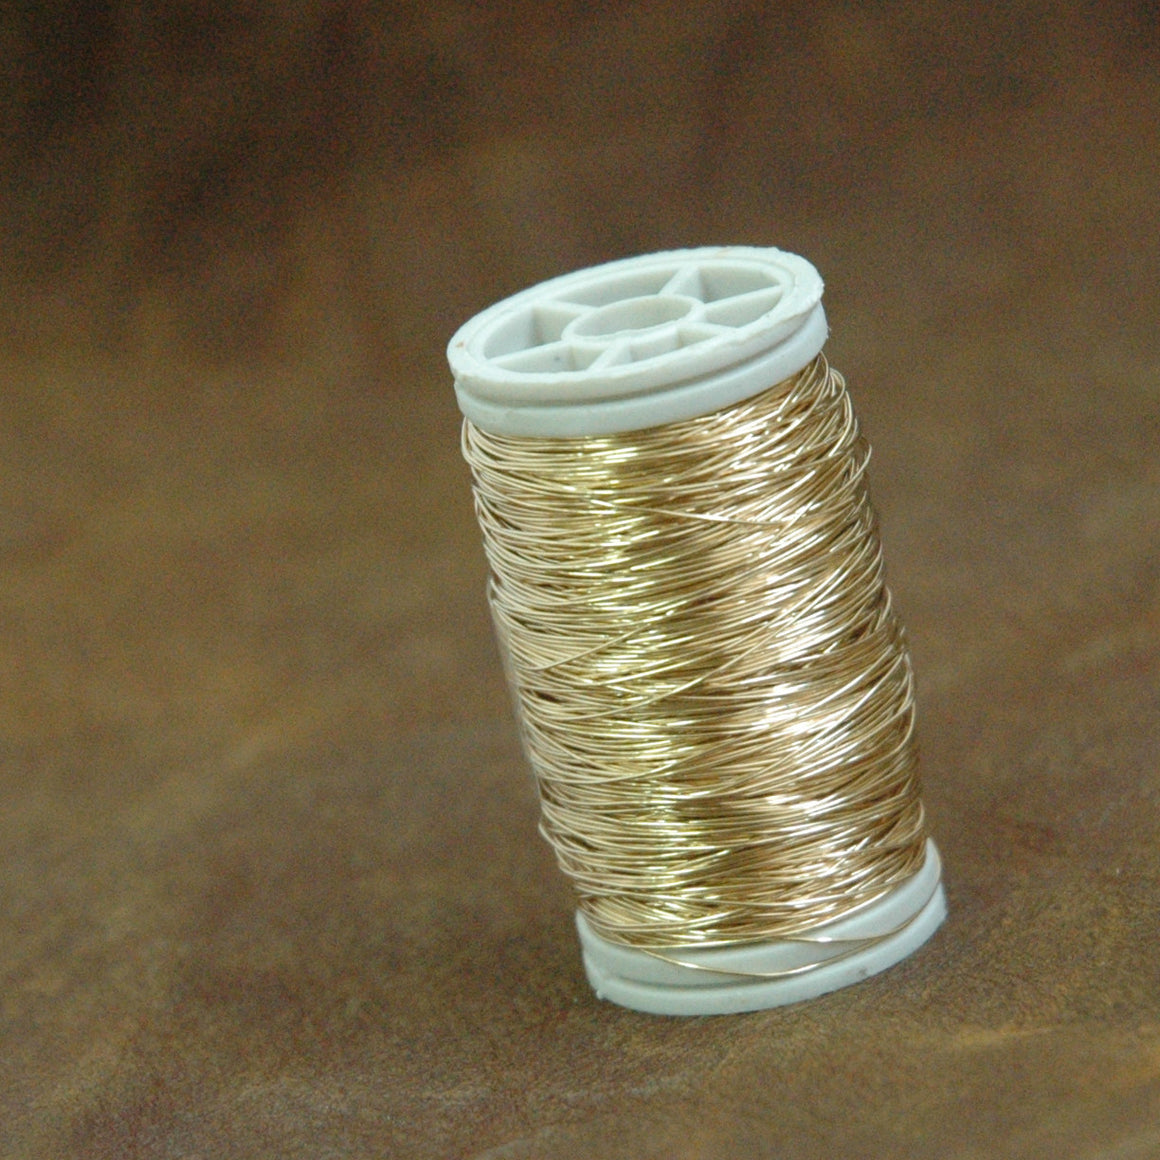 Gold filled wire , dead soft gold filled , 30 gauge , wire crochet supplies, gold wire - Yooladesign